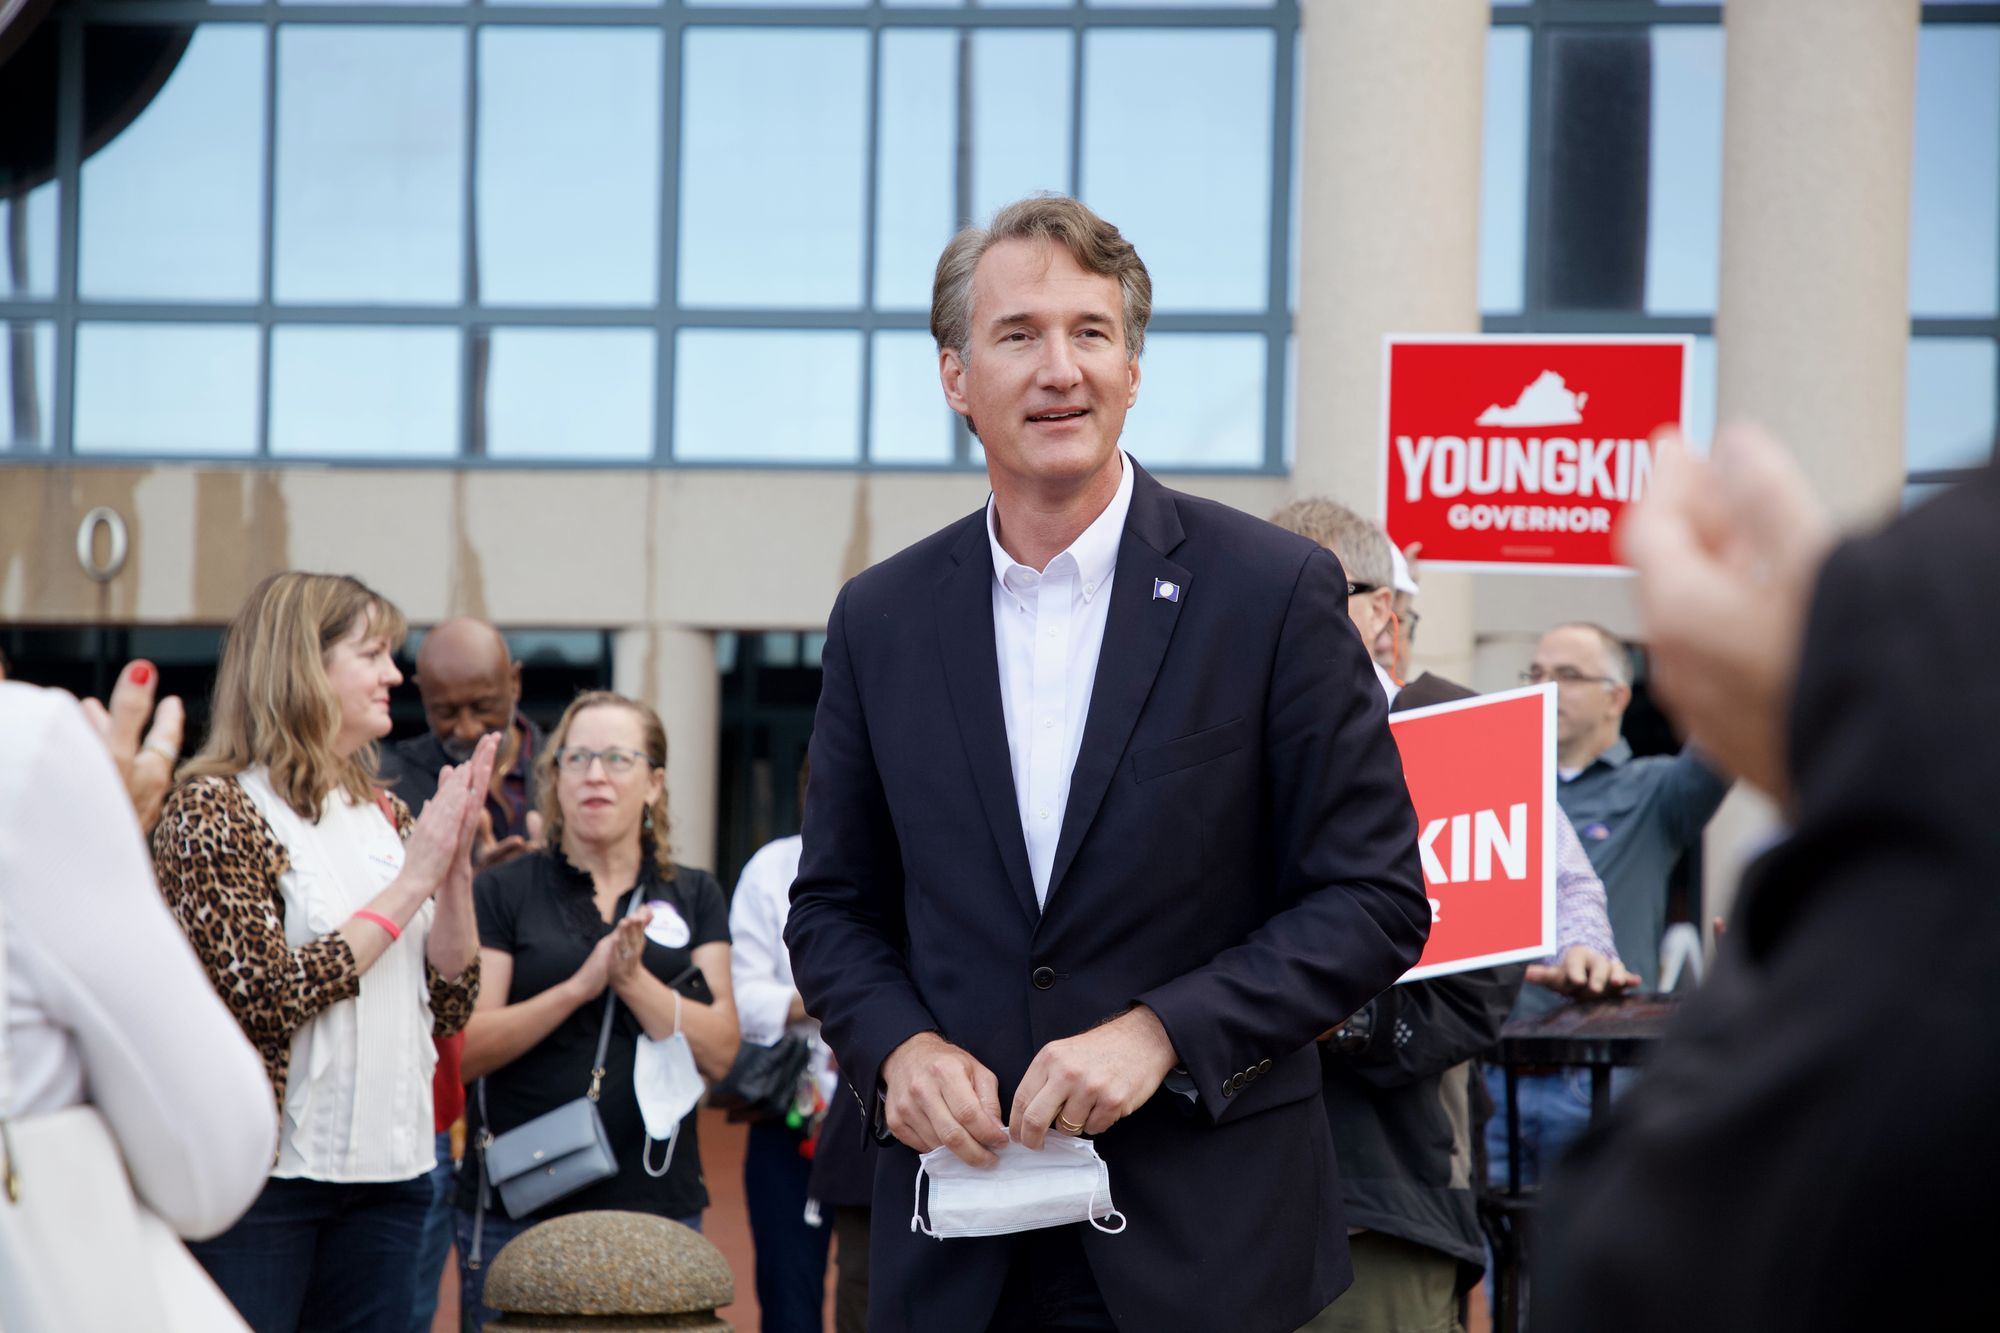 Glen Youngkin during early voting in Fairfax. Photo: Glenn Youngkin